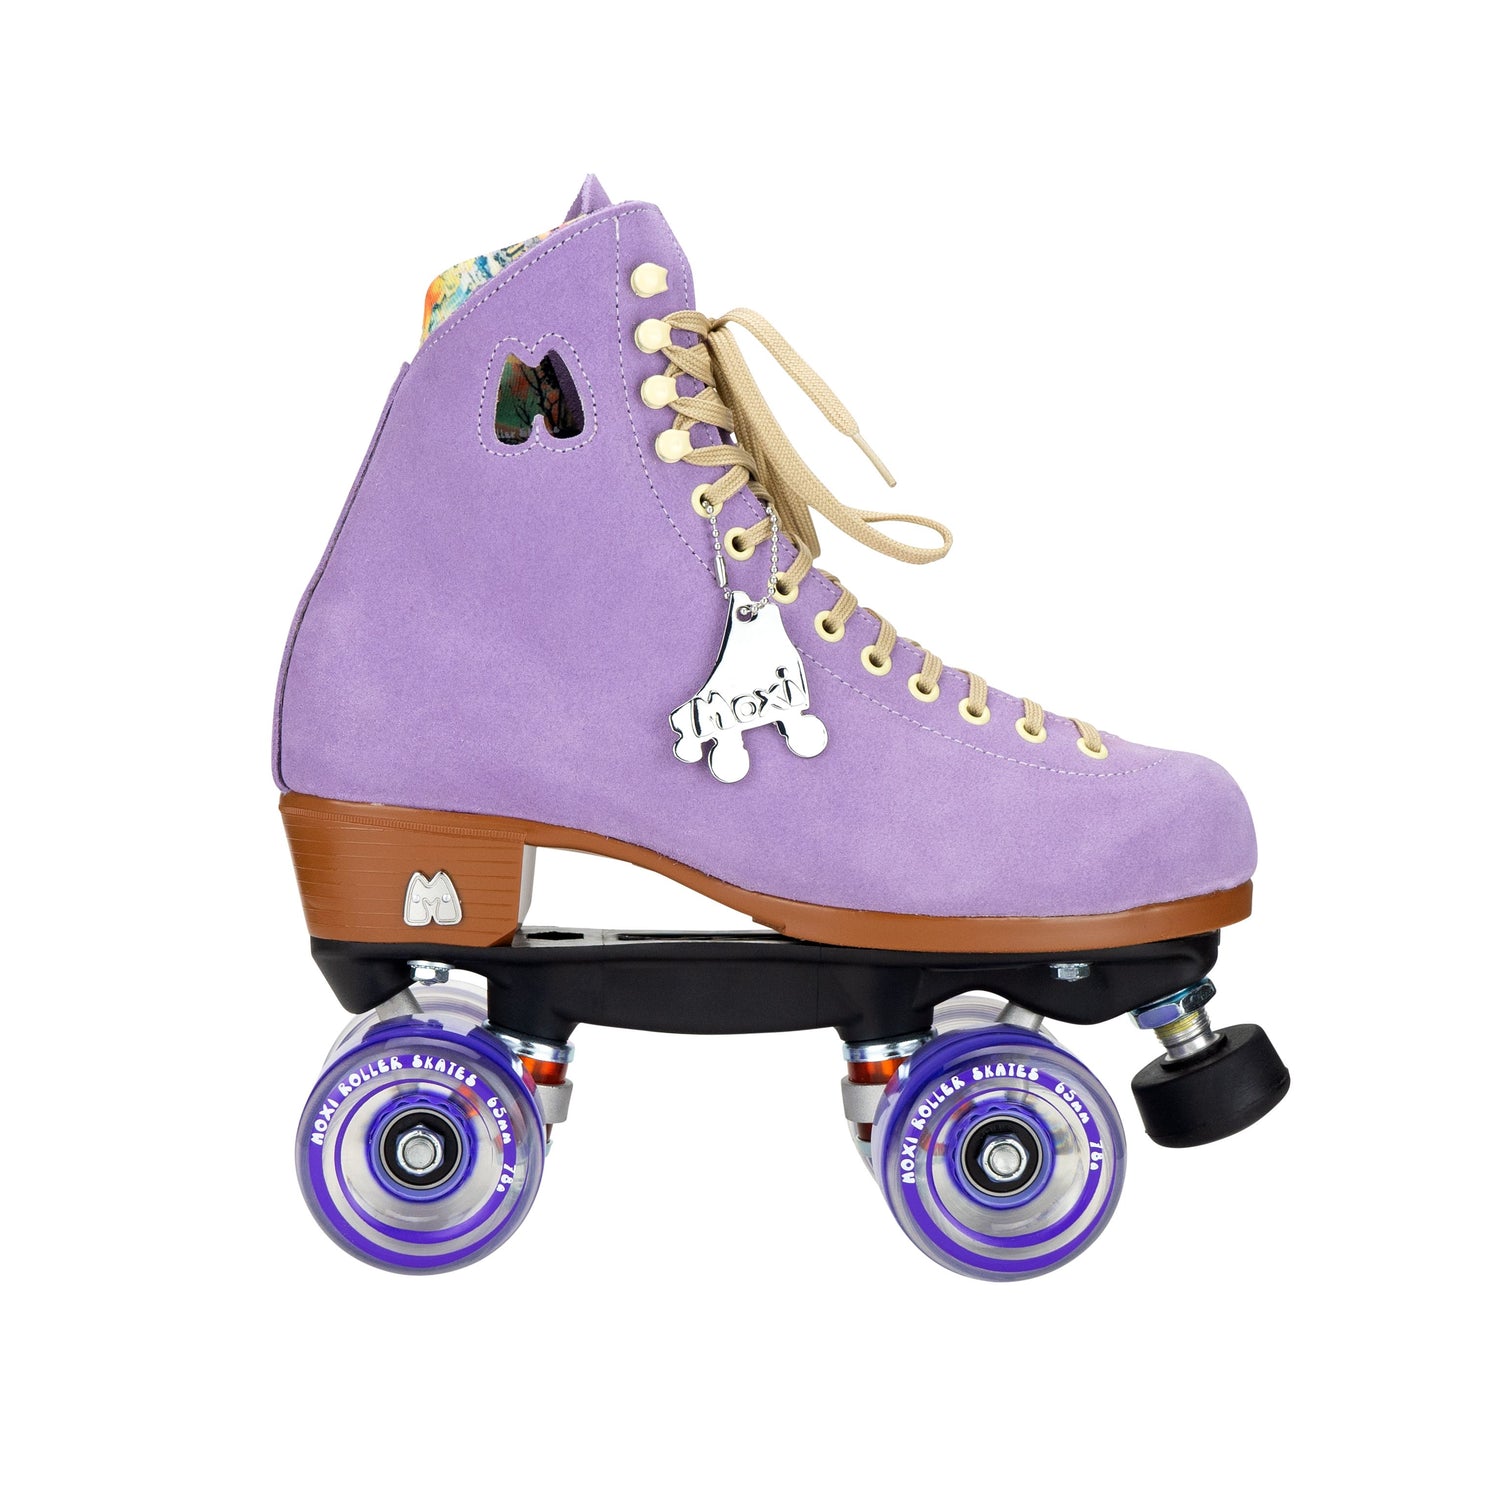 Come to Fresa's Roller Skate shop in Las Vegas and get your Moxi Lollys Skates.  These Lilac Moxi Lolly Roller Skates are ready to the outdoor. Cruise around Las Vegas Art District or come and skate in our indoor skate ramp.